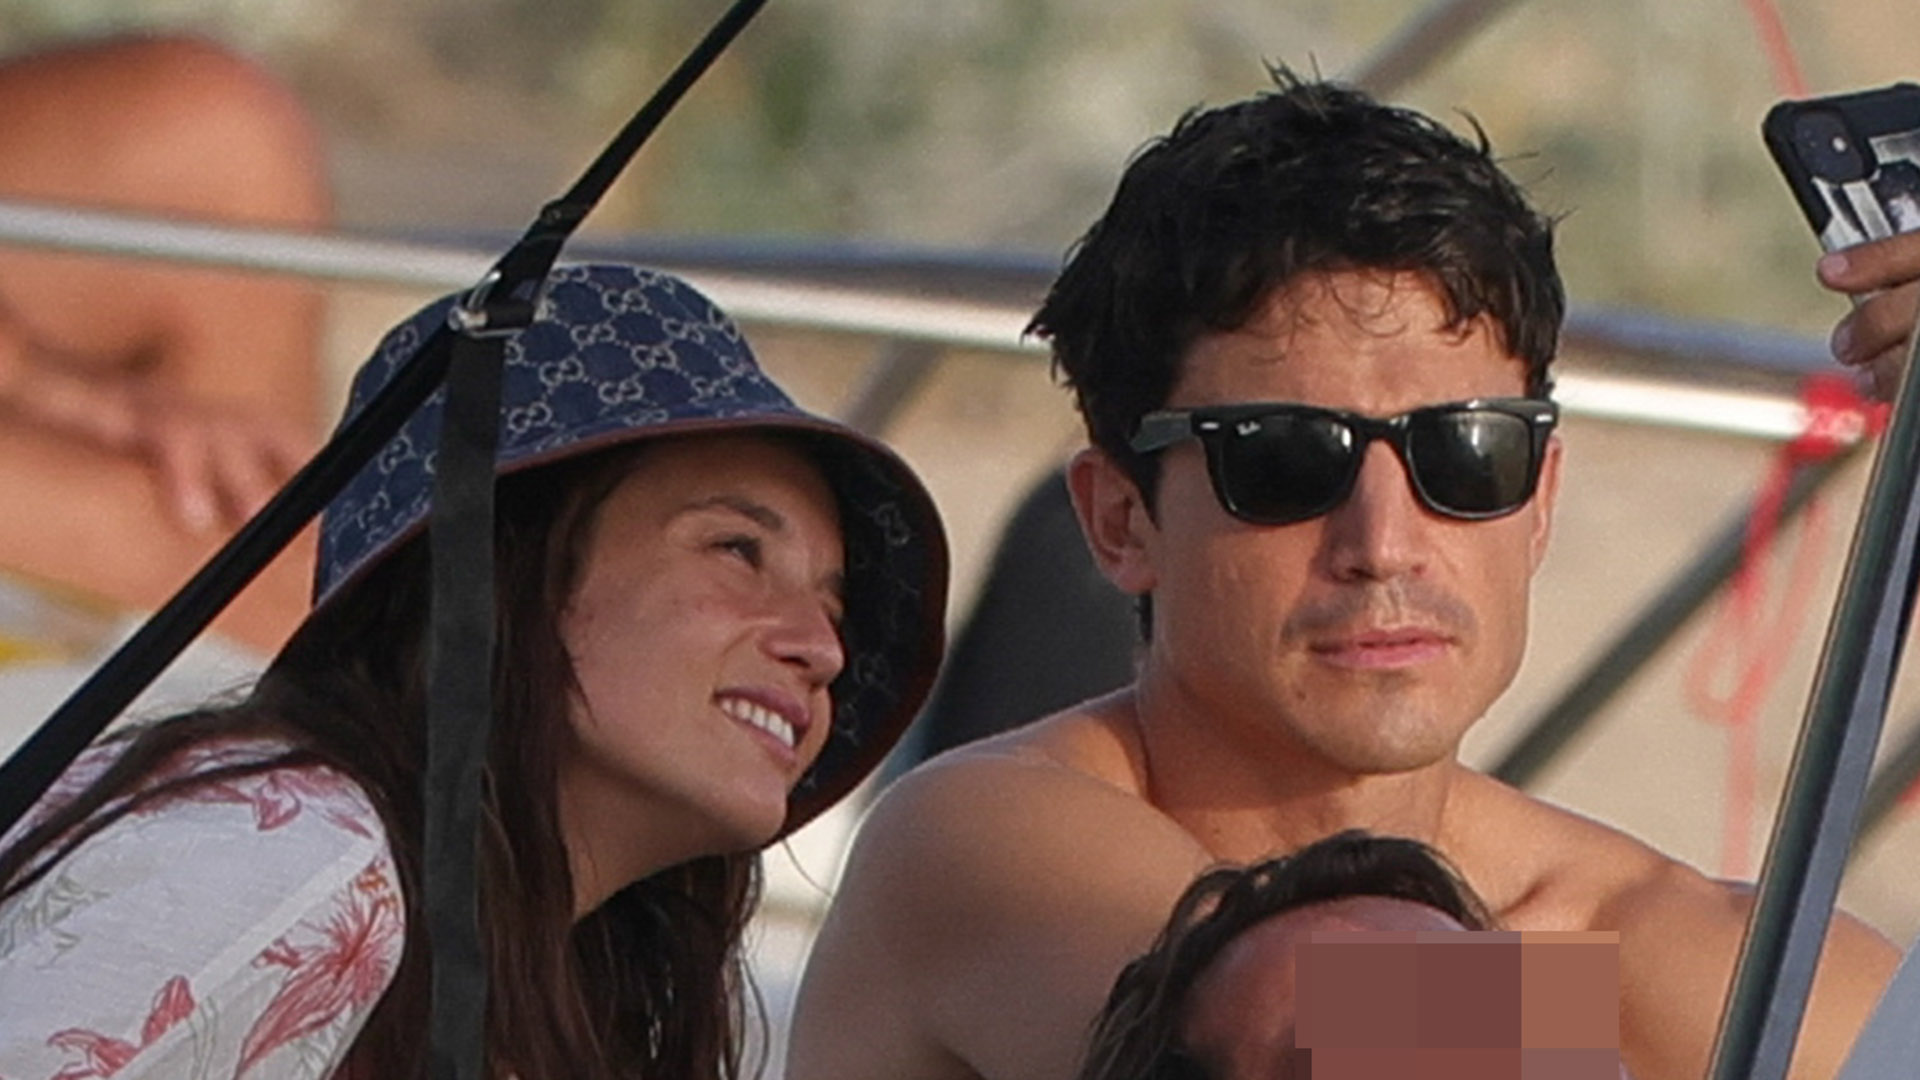 UActors Alex GonzÃ¡lez and Maria Pedraza with male friend on holidays in Ibiza, July 05 2022.